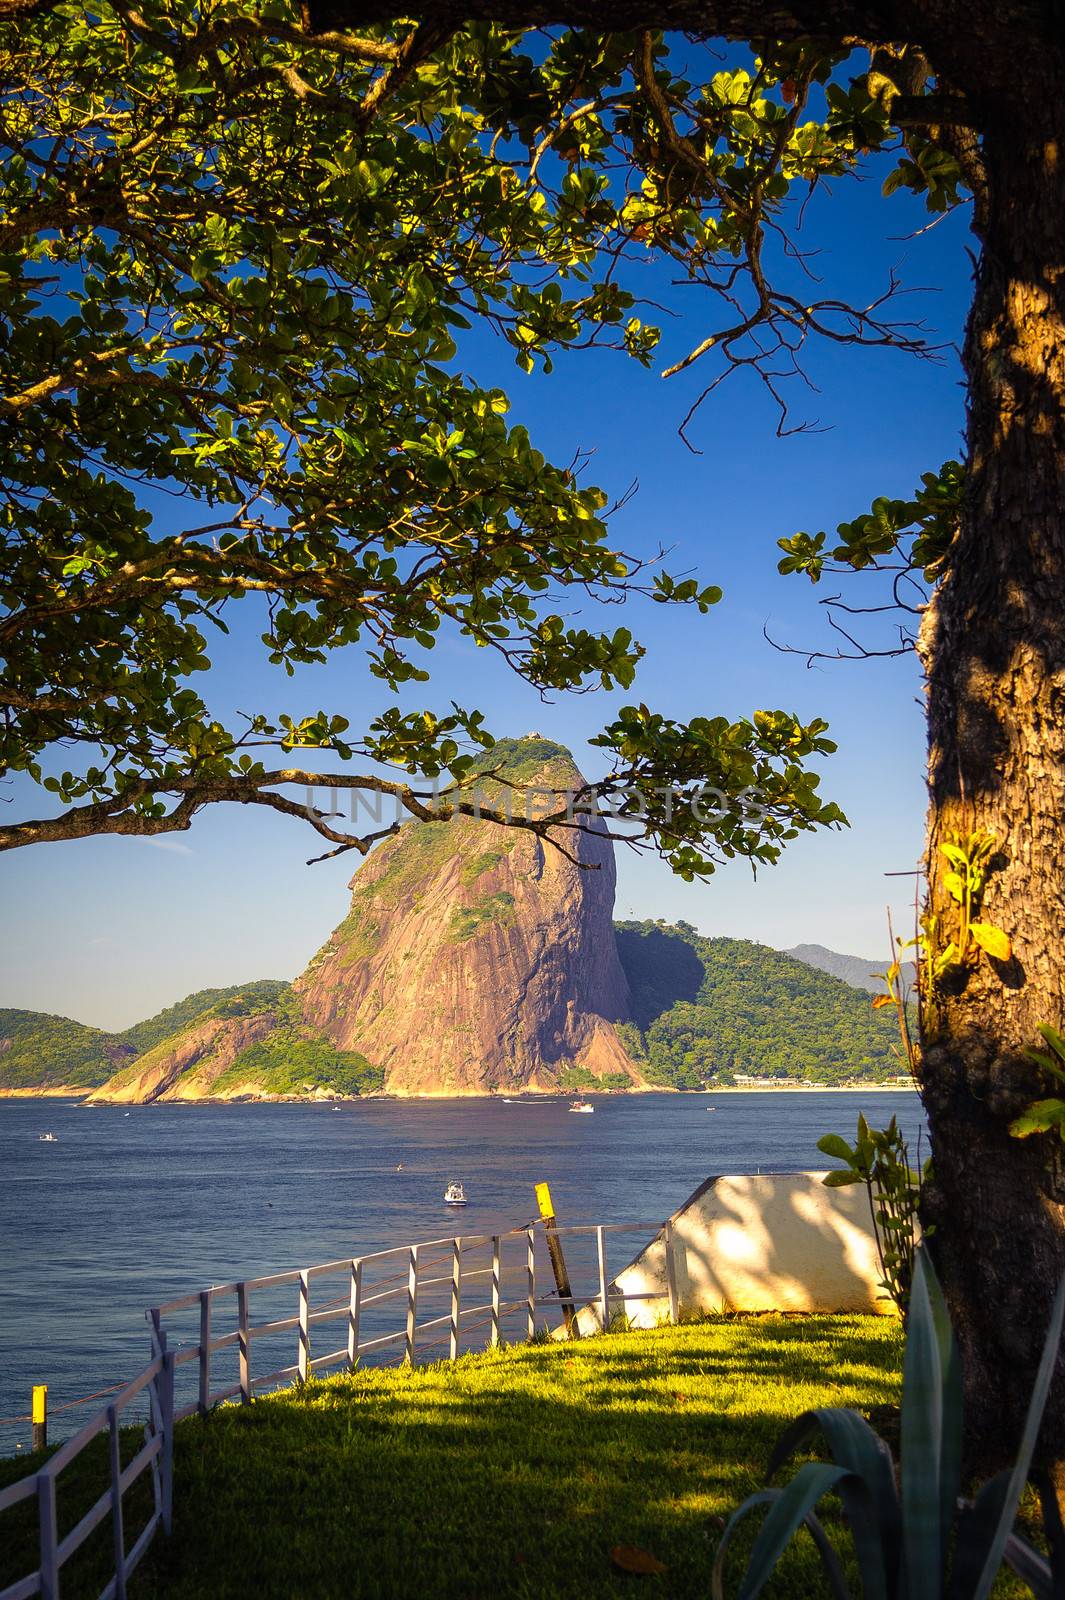 Fort at the waterfront with Sugarloaf Mountain in the background, Guanabara Bay, Rio De Janeiro, Brazil